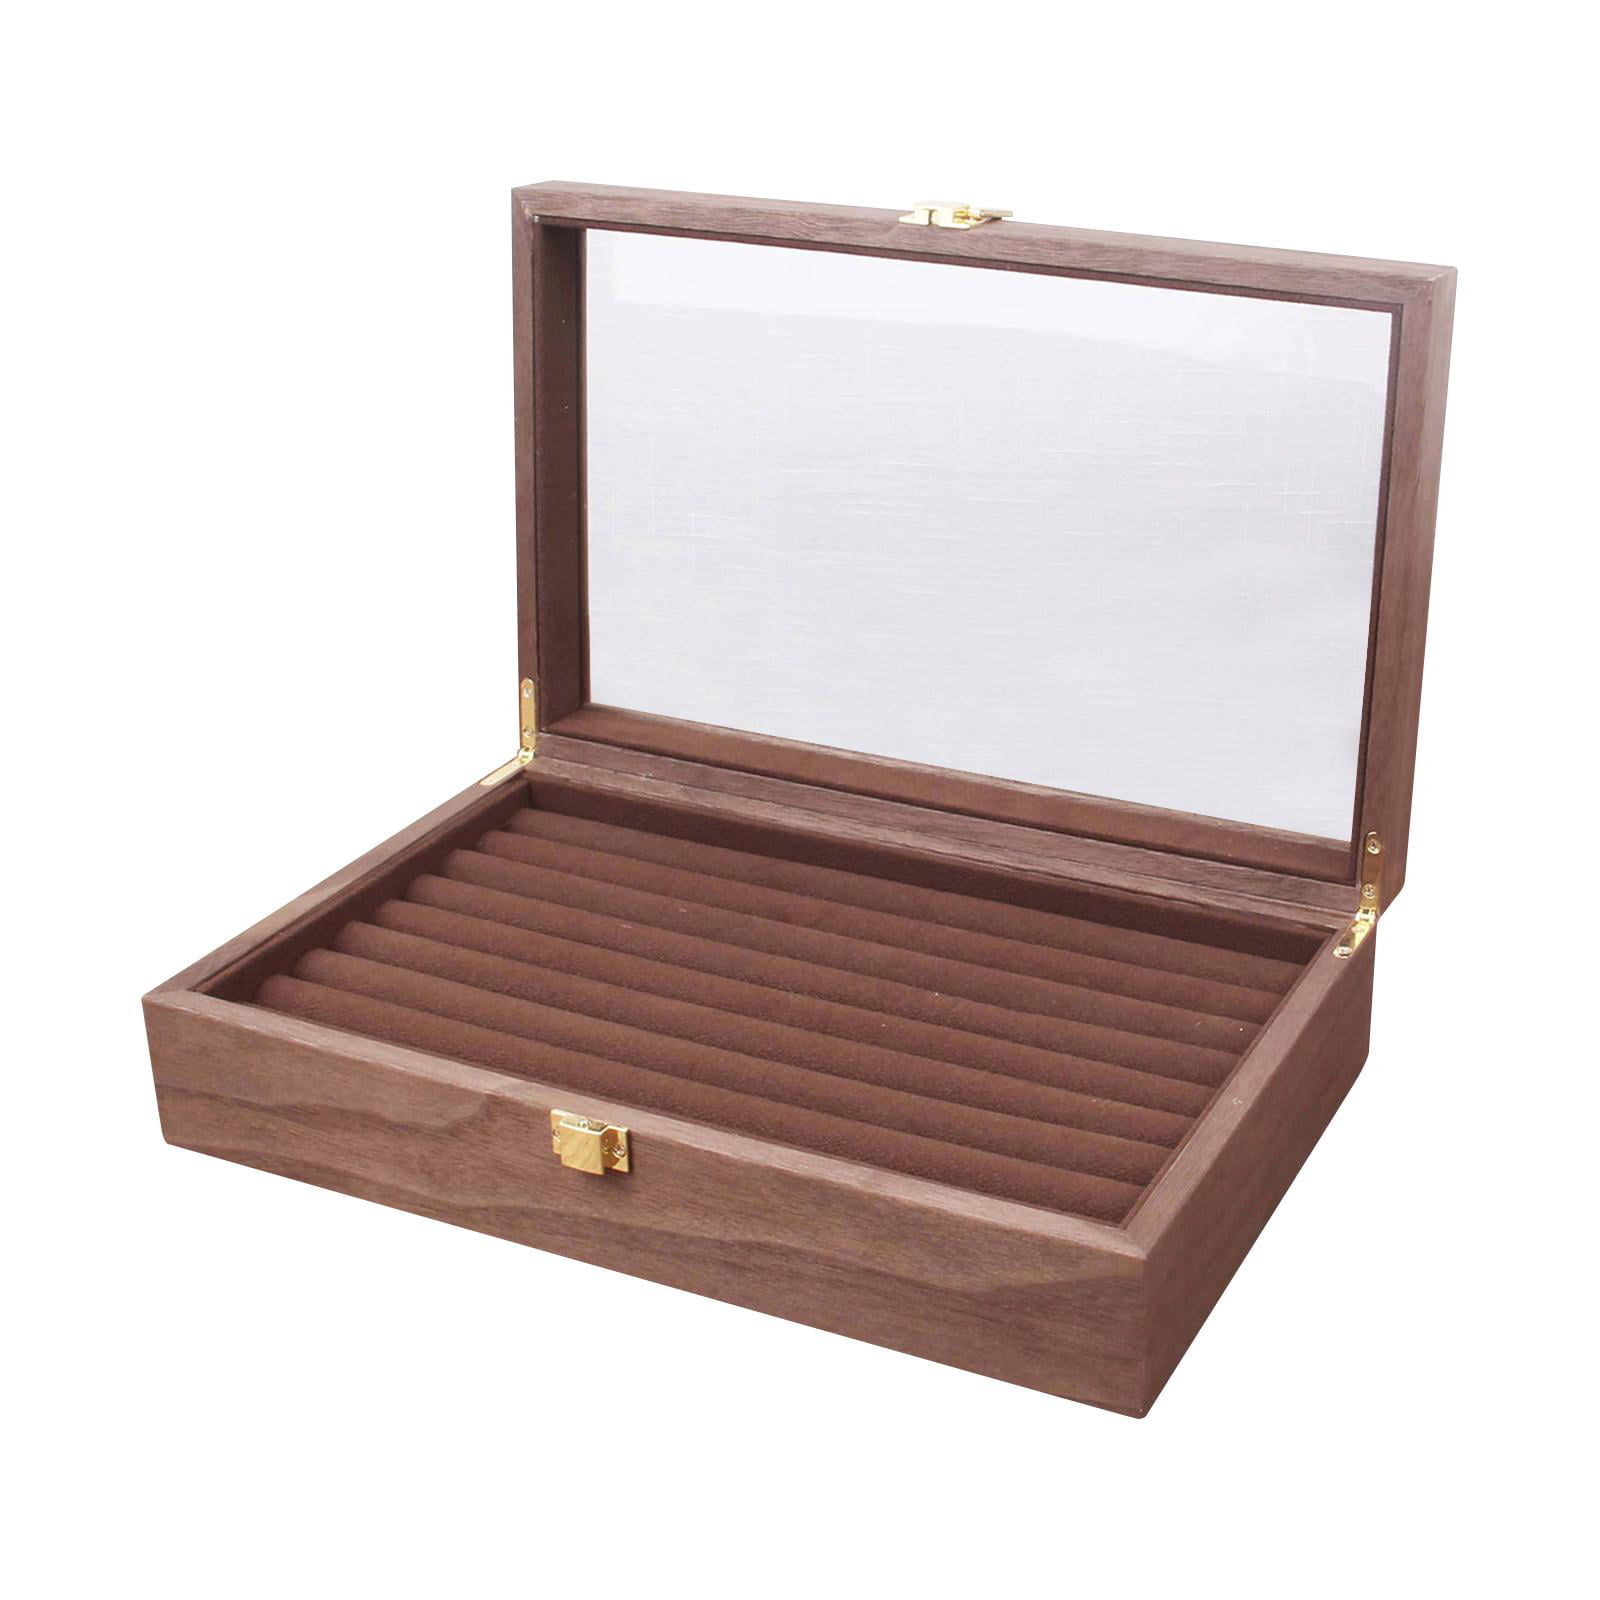 Cigar Boxes Empty Wooden 7-inches, Pack of 6 Small Wooden Boxes With Hinged  Lid, Wooden Gift Box, Wood Box for Crafts, by Woodpeckers